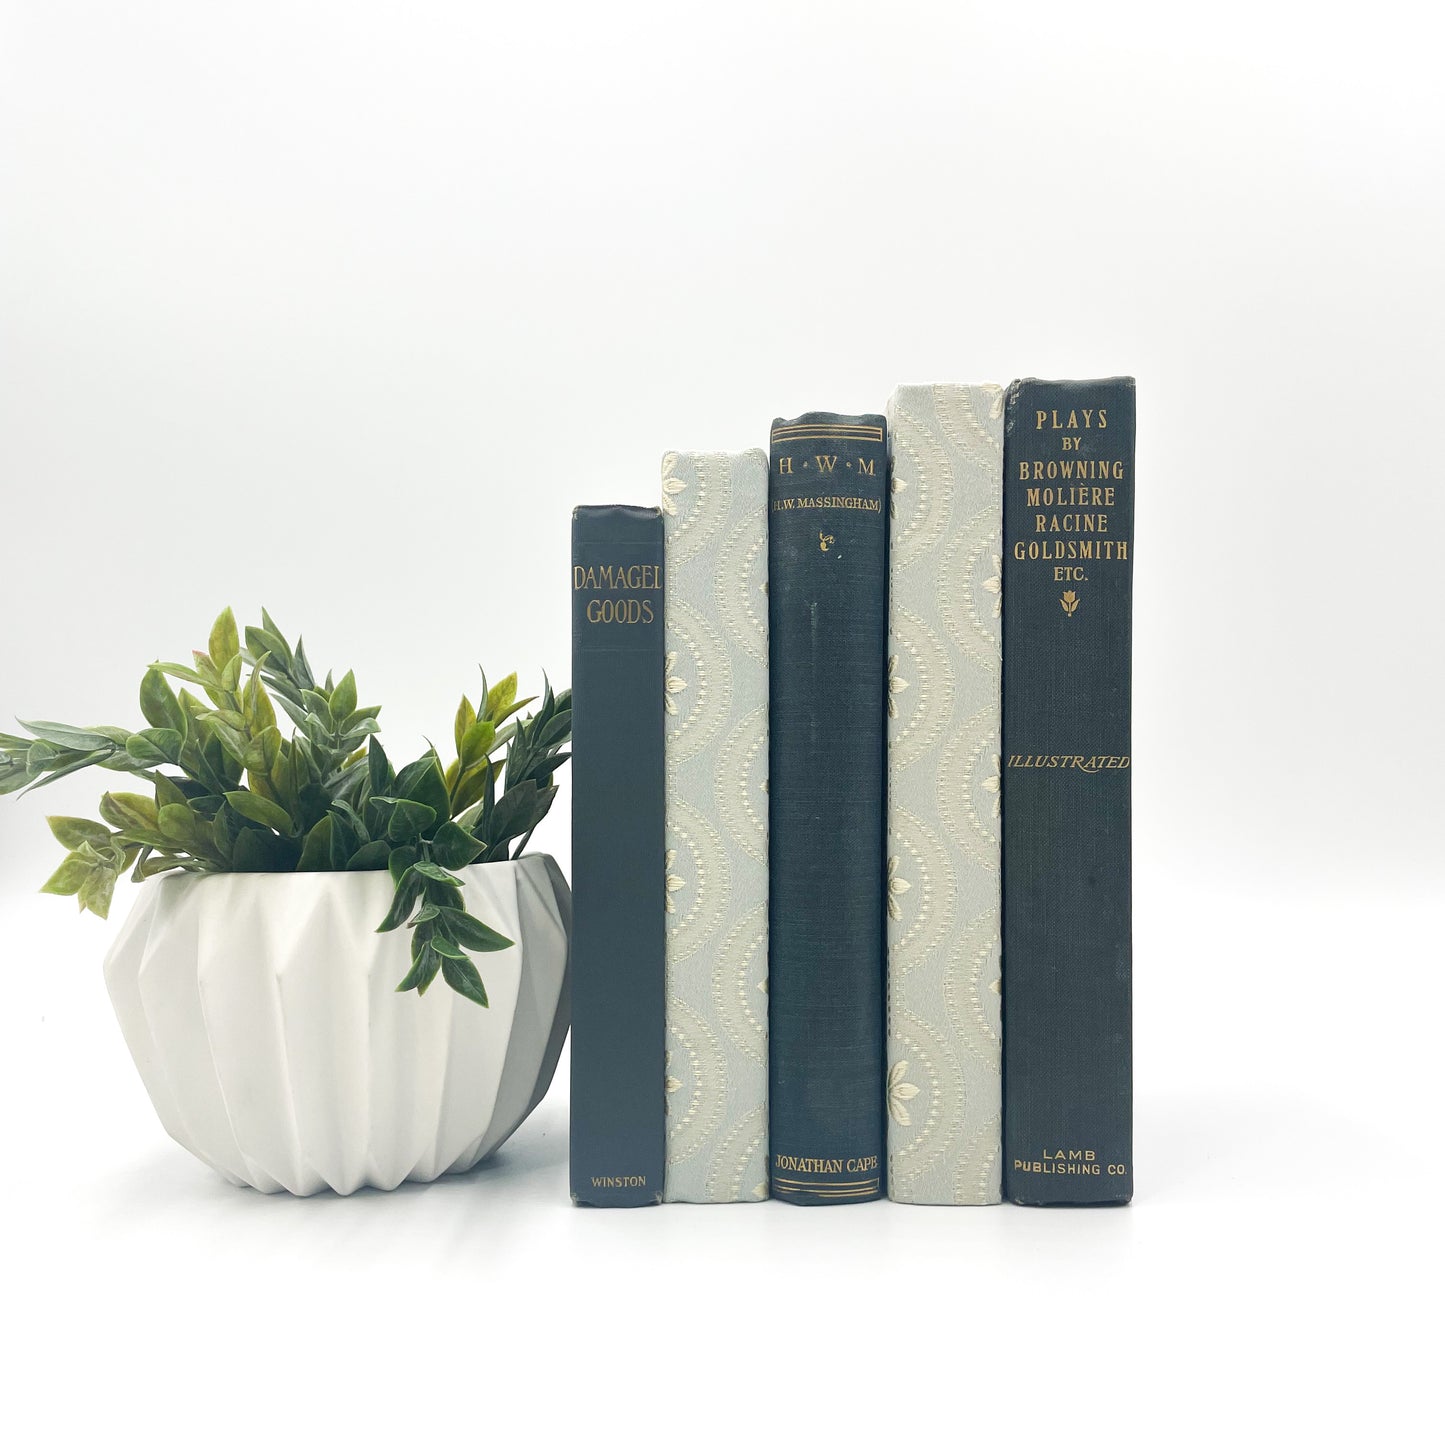 Classic Blue and Gold Book Decor